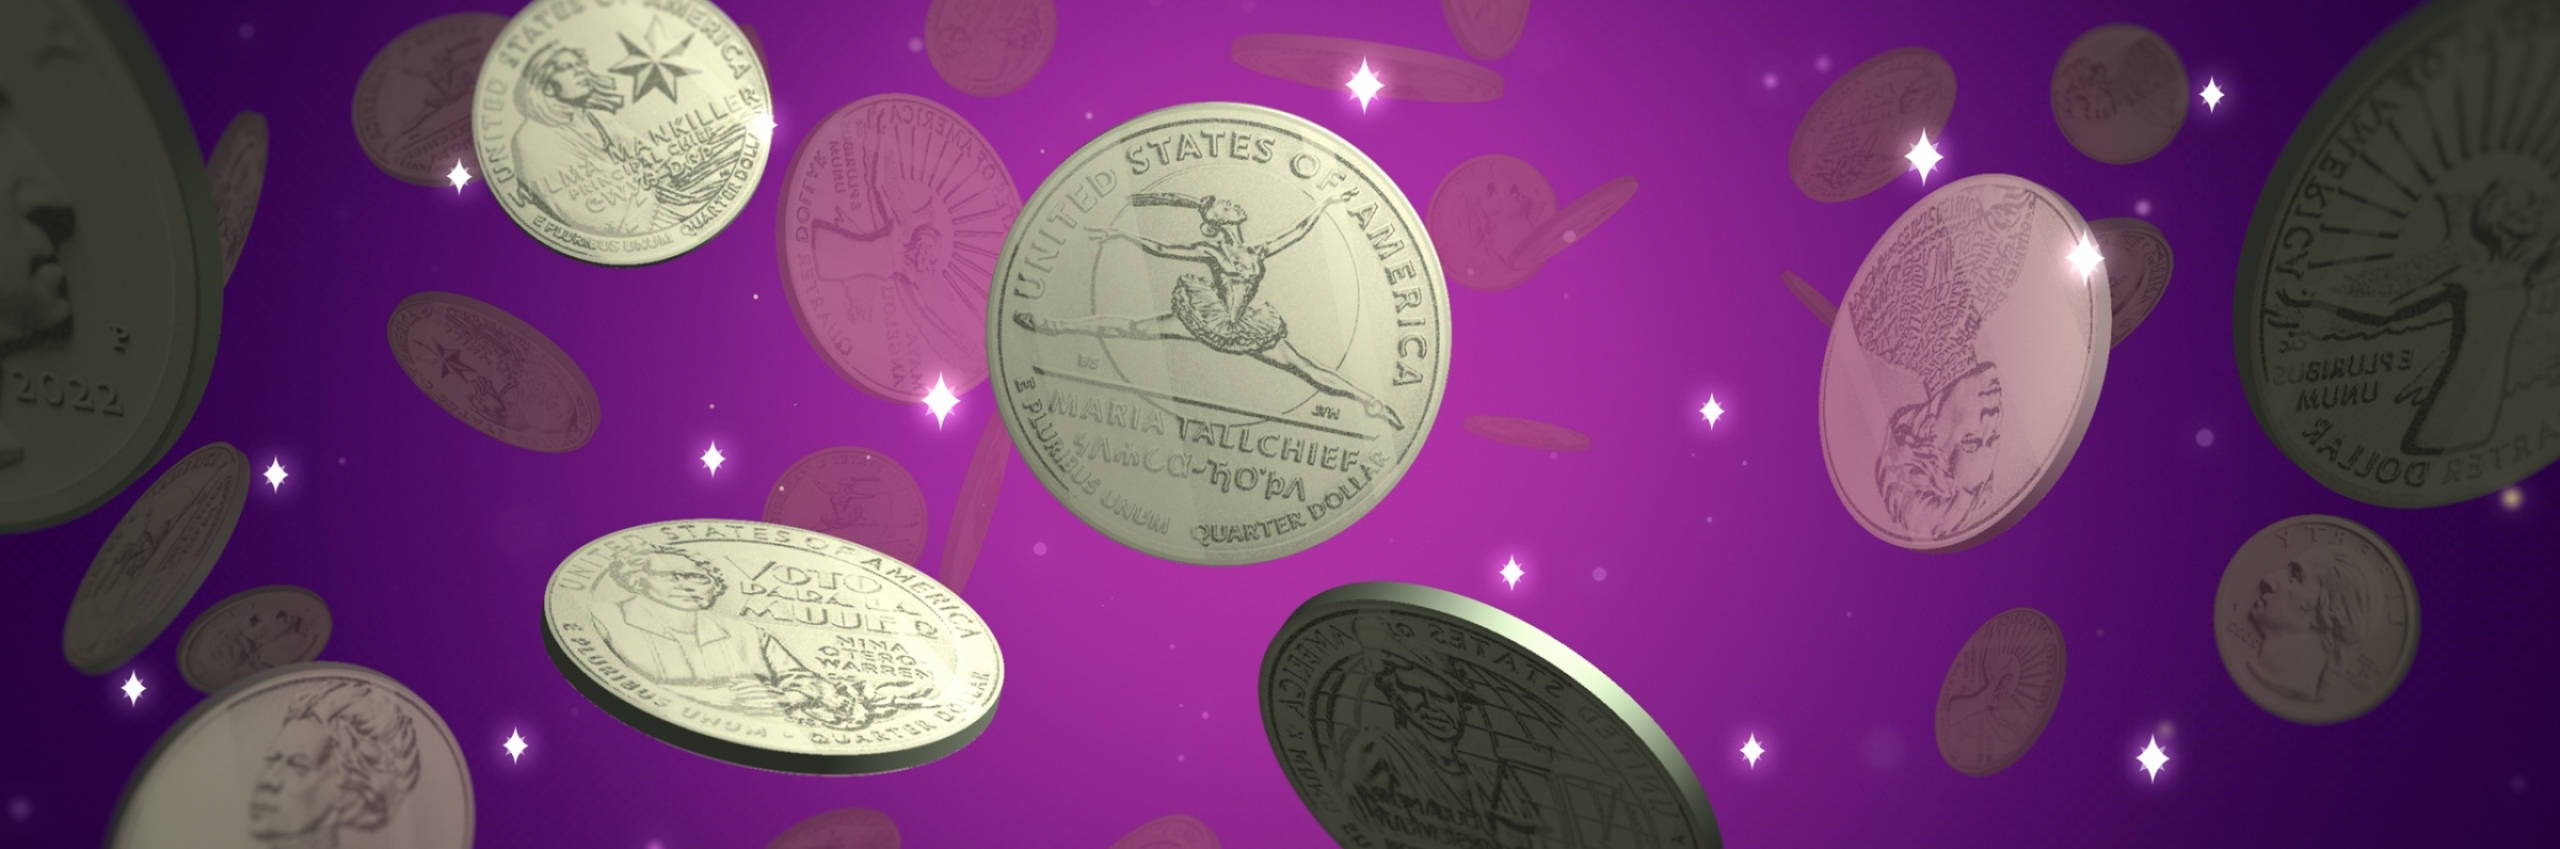 Purple background with illustrated coins floating around.